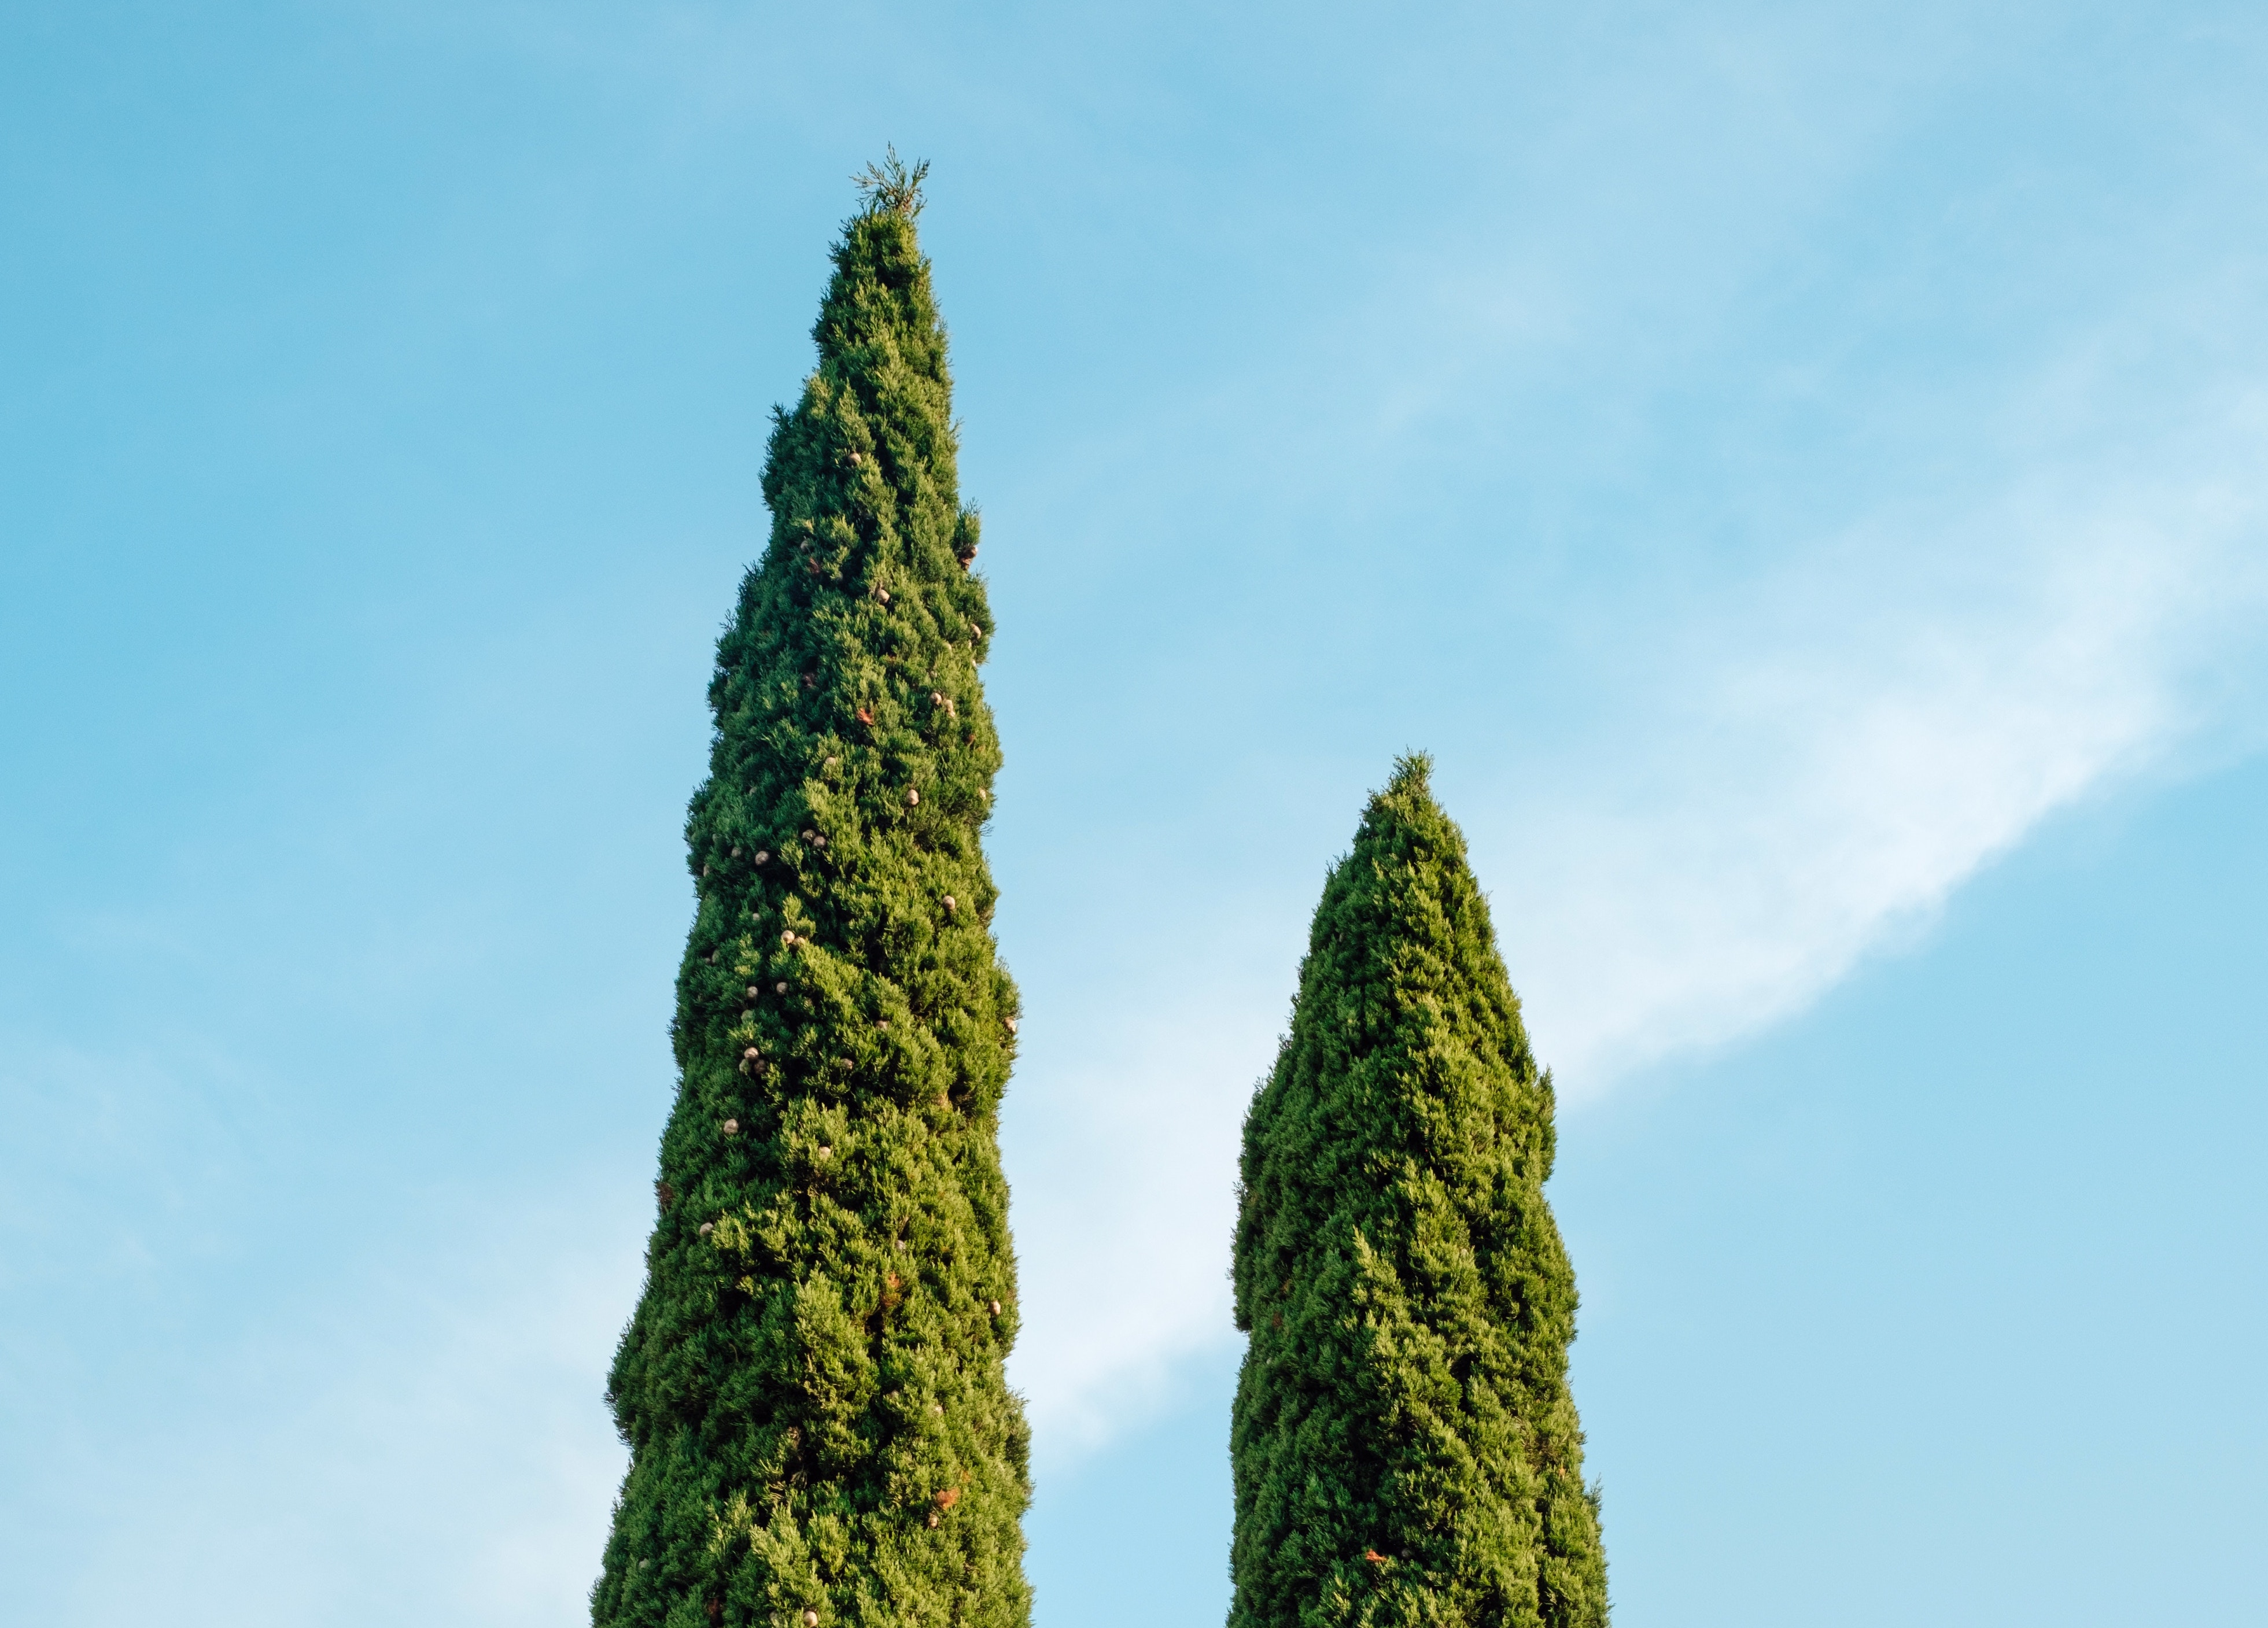 Tops of two topiary shrubs